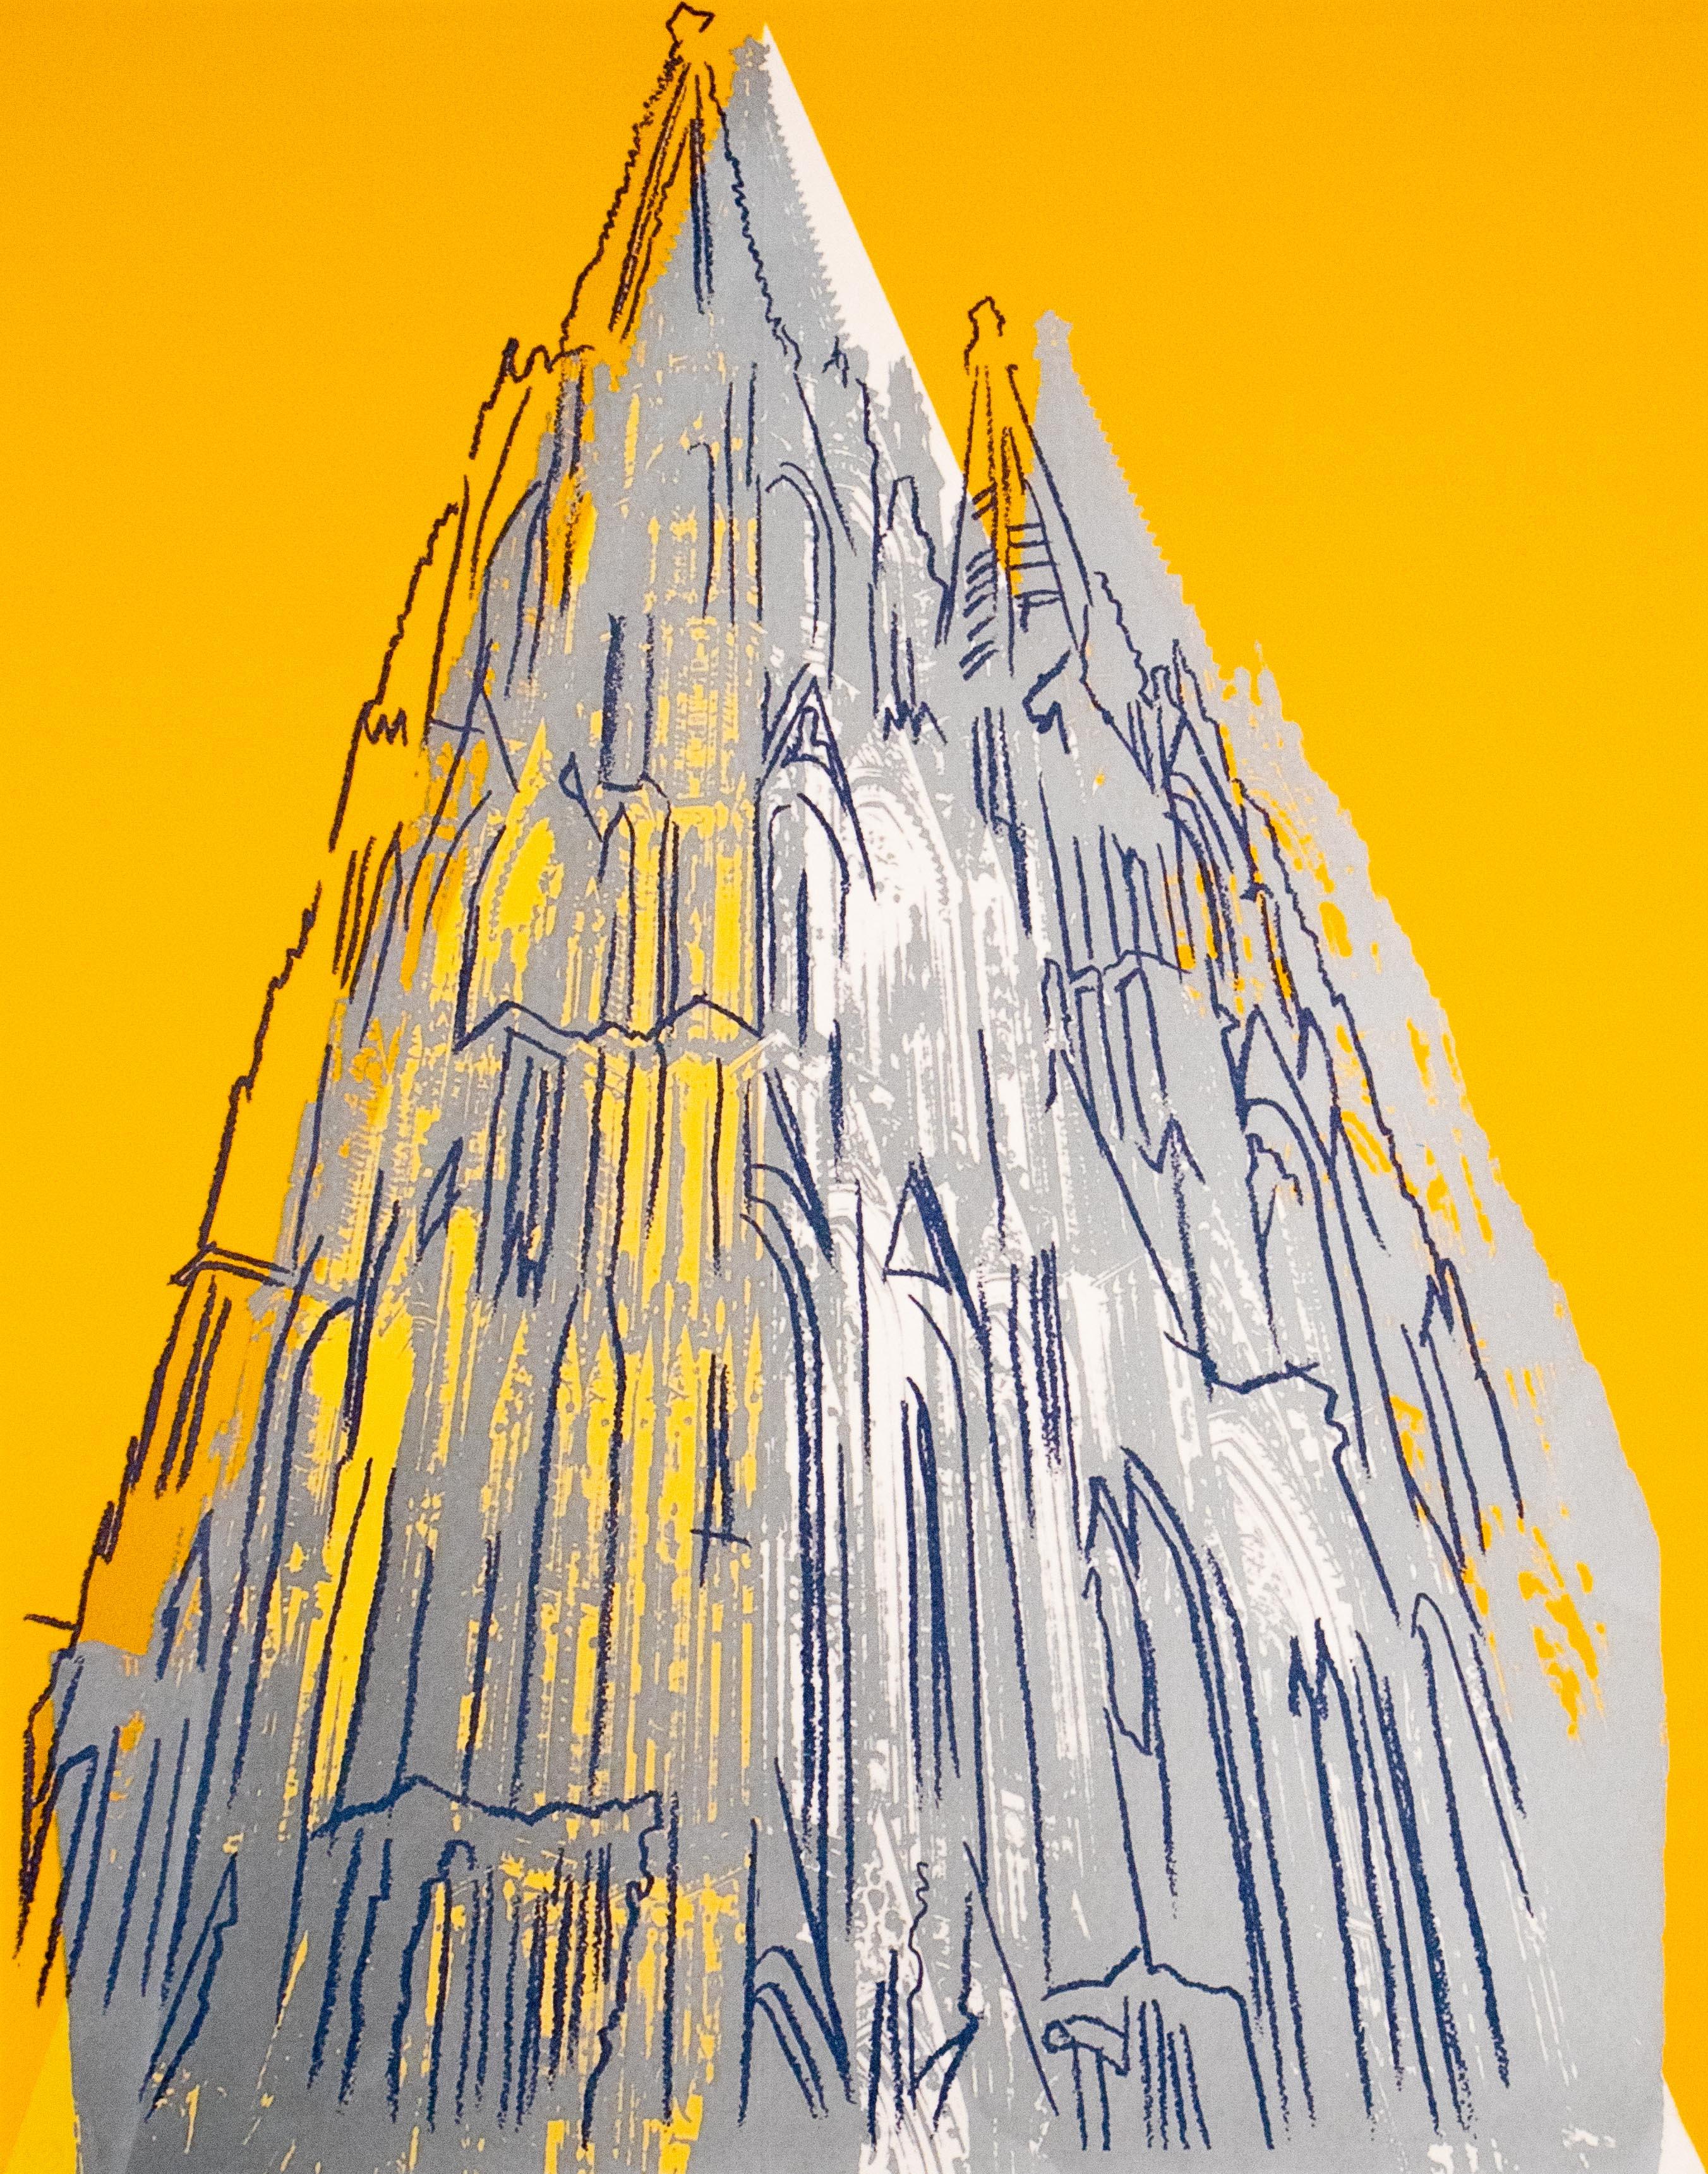 ANDY WARHOL – Cologne Cathedral
Rare and limited 1980s edition by Georges Israel Editeur Paris/Leo Castelli New York

Only 100 copies total (here 47/100).
Original lithograph on handmade Arches paper incl. watermark.

Signed in plate.
Edition hand